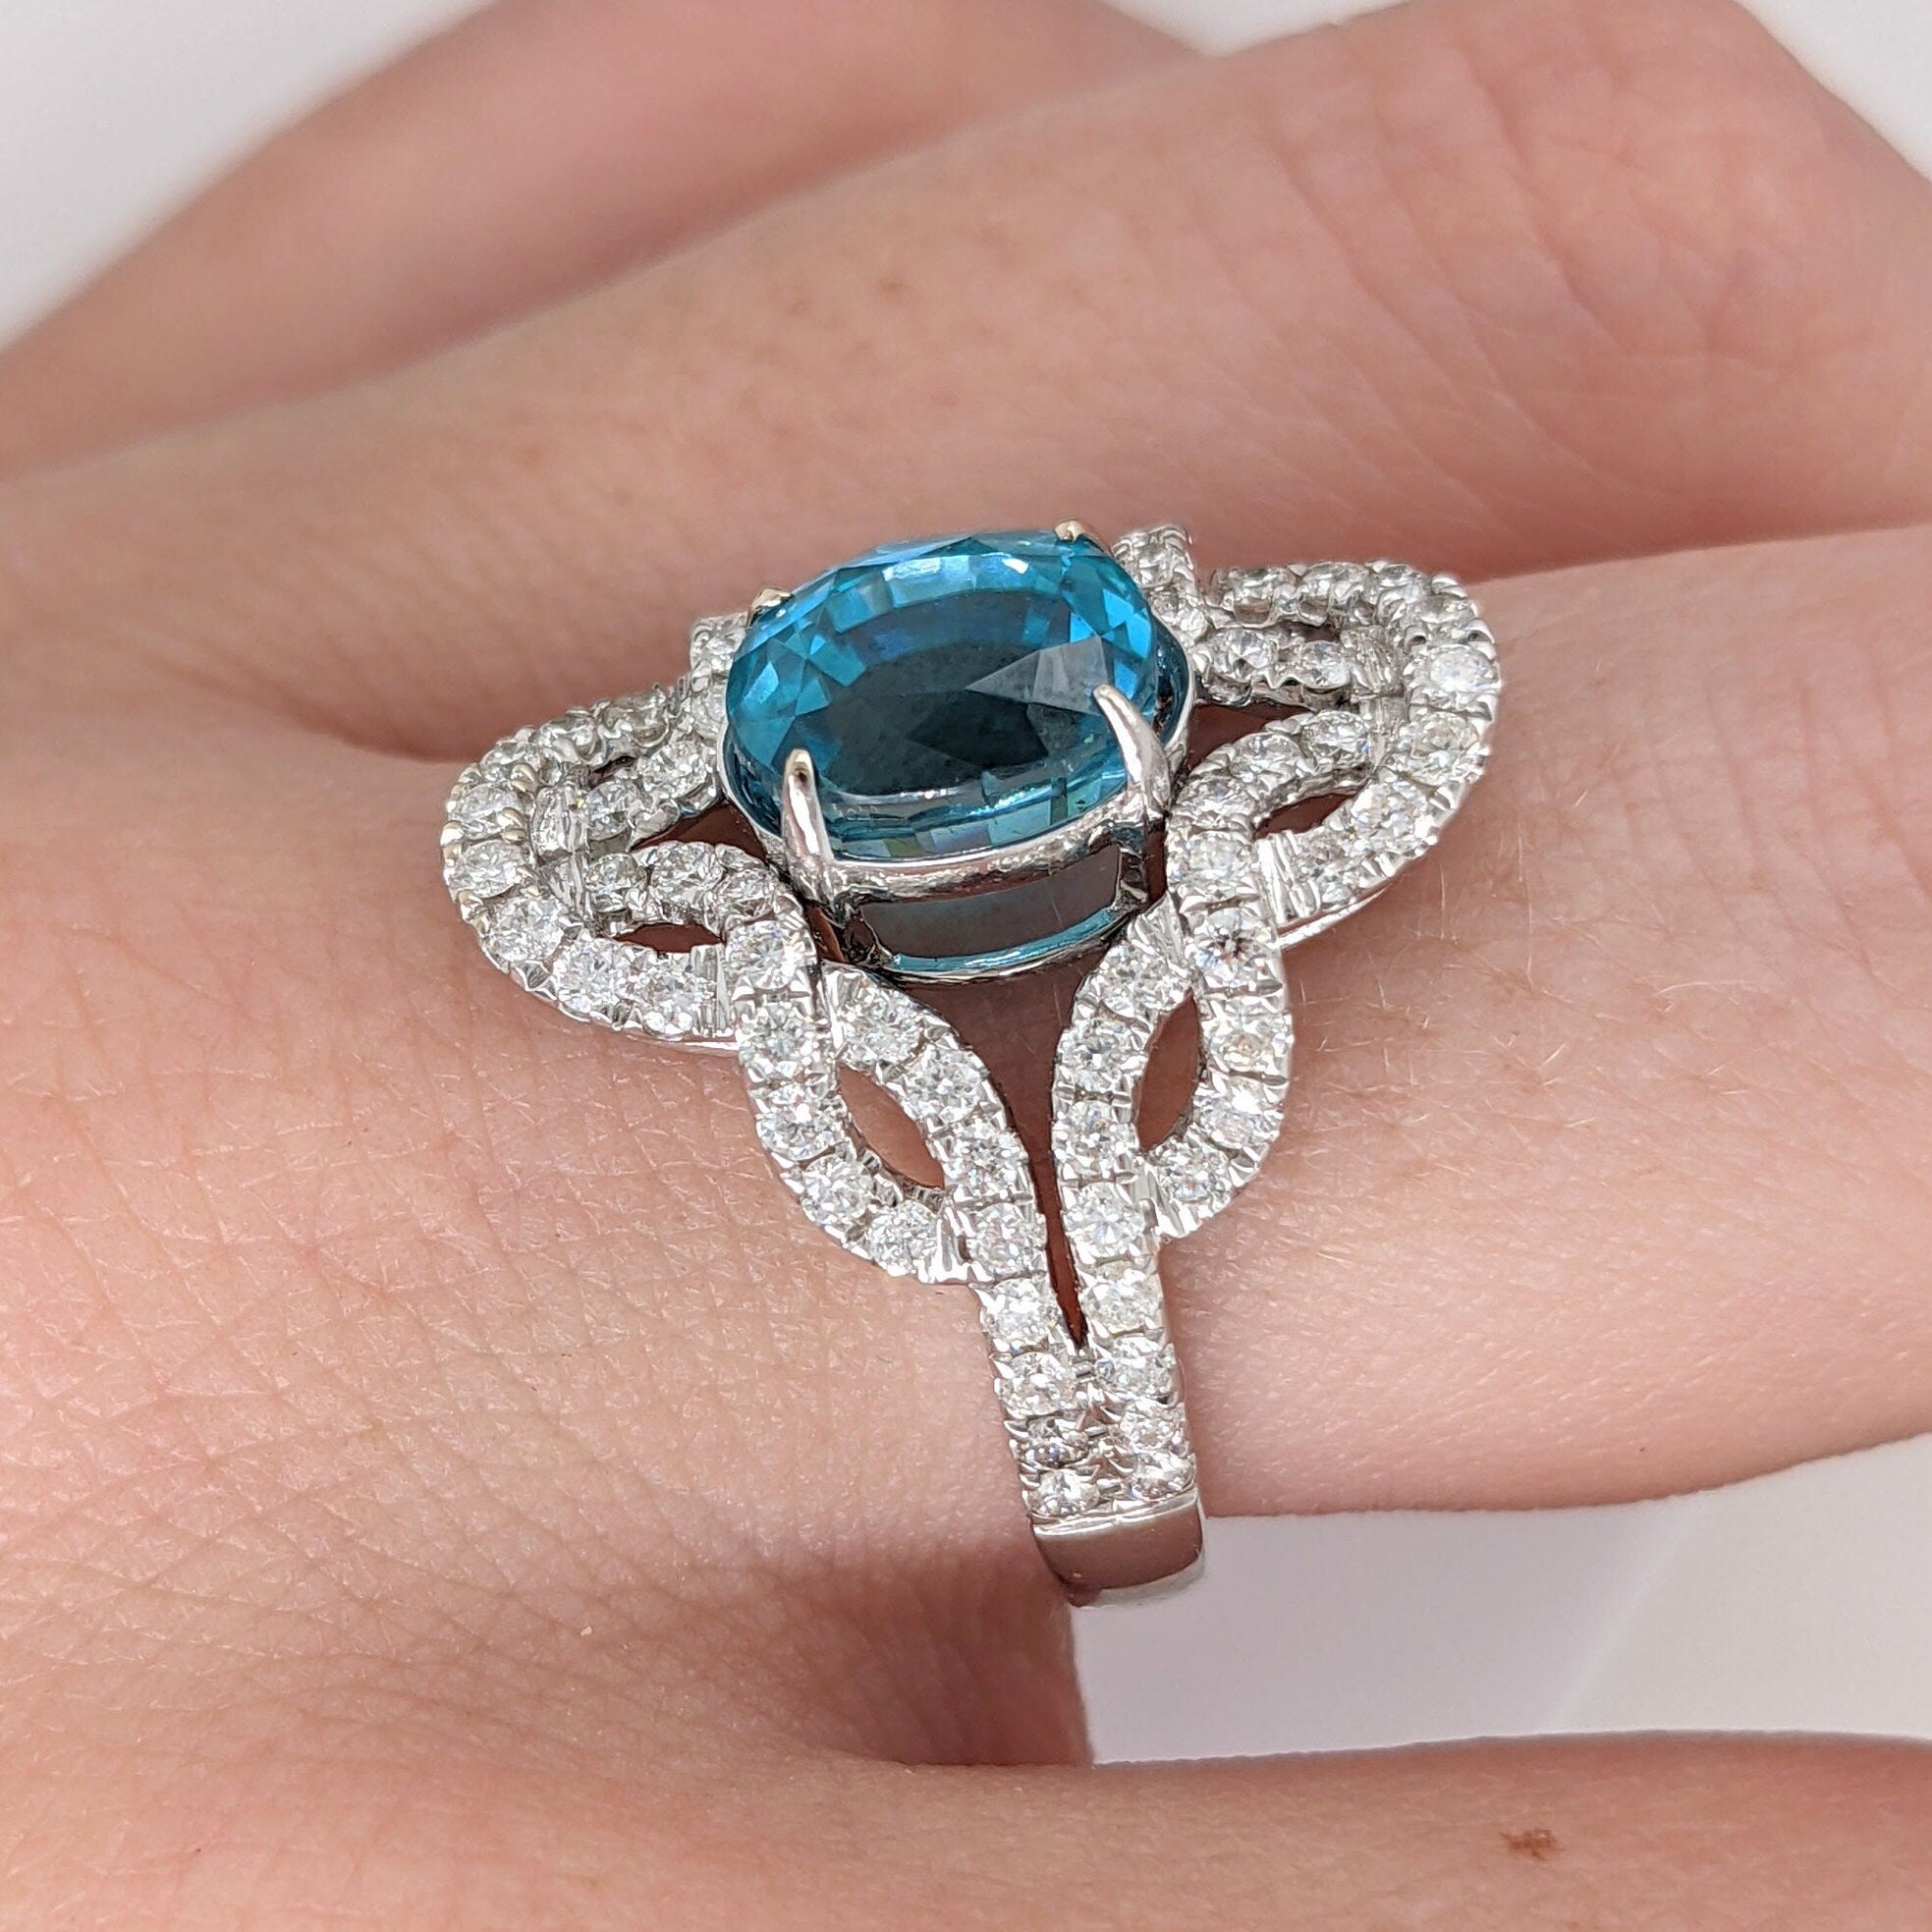 Sparkling Blue Zircon Ring in Solid 14K White Gold w Intricate Pave Diamond Design | Oval 9.5x7.5mm | Art Deco Ring | December Birthstone